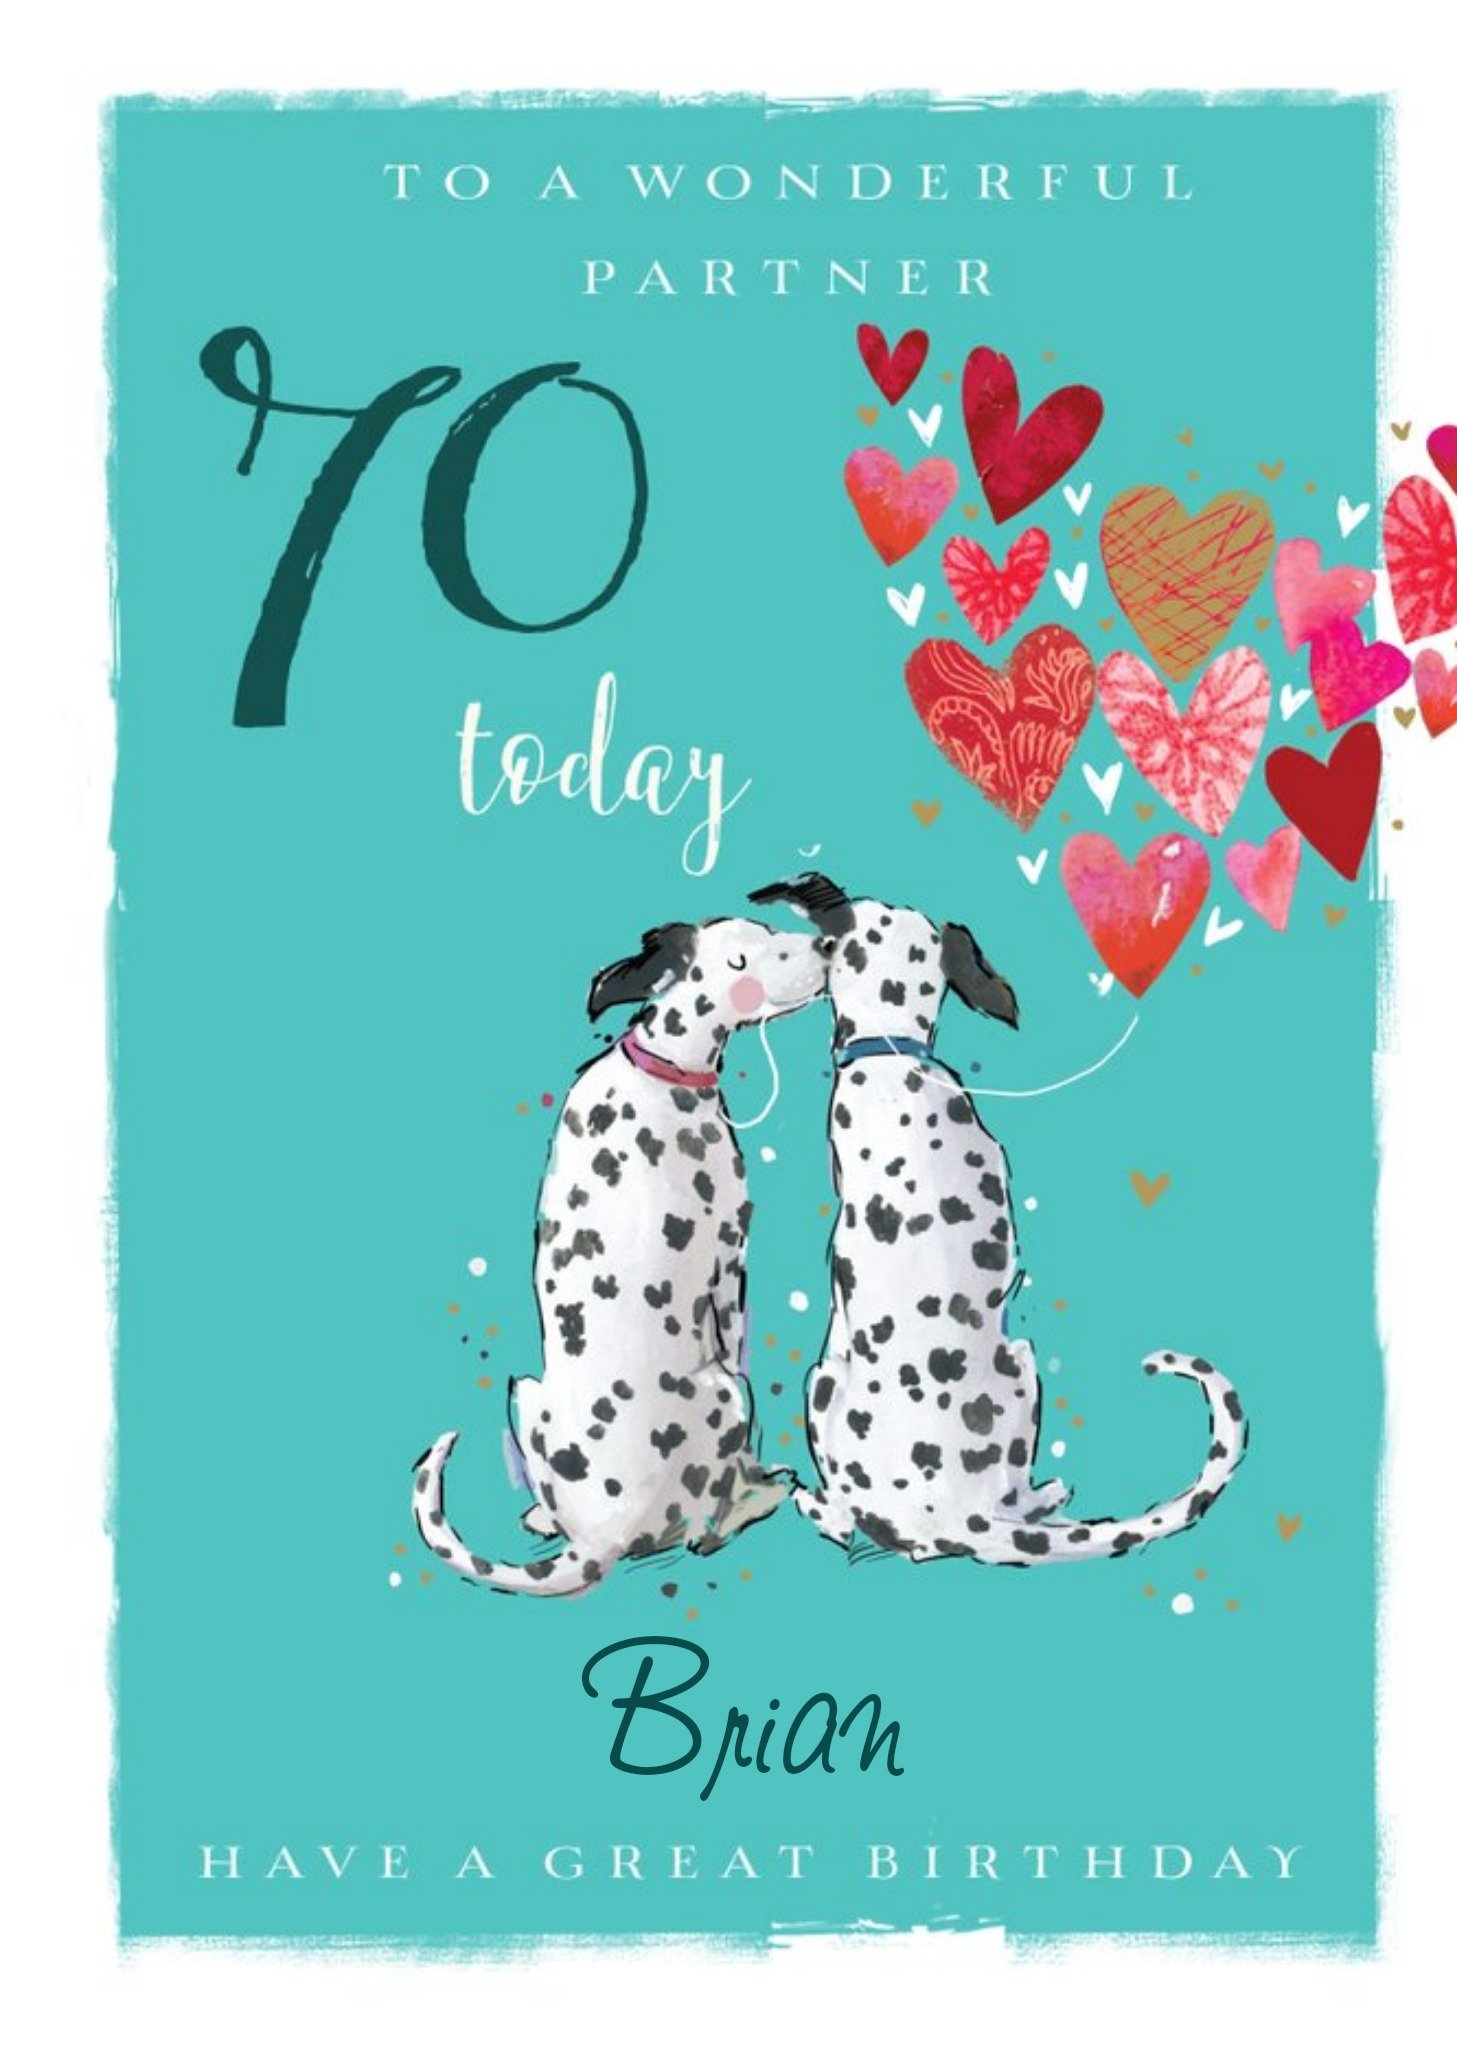 Ling Design Illustrated Dalmation Patterned Balloons Partner 70th Birthday Card Ecard